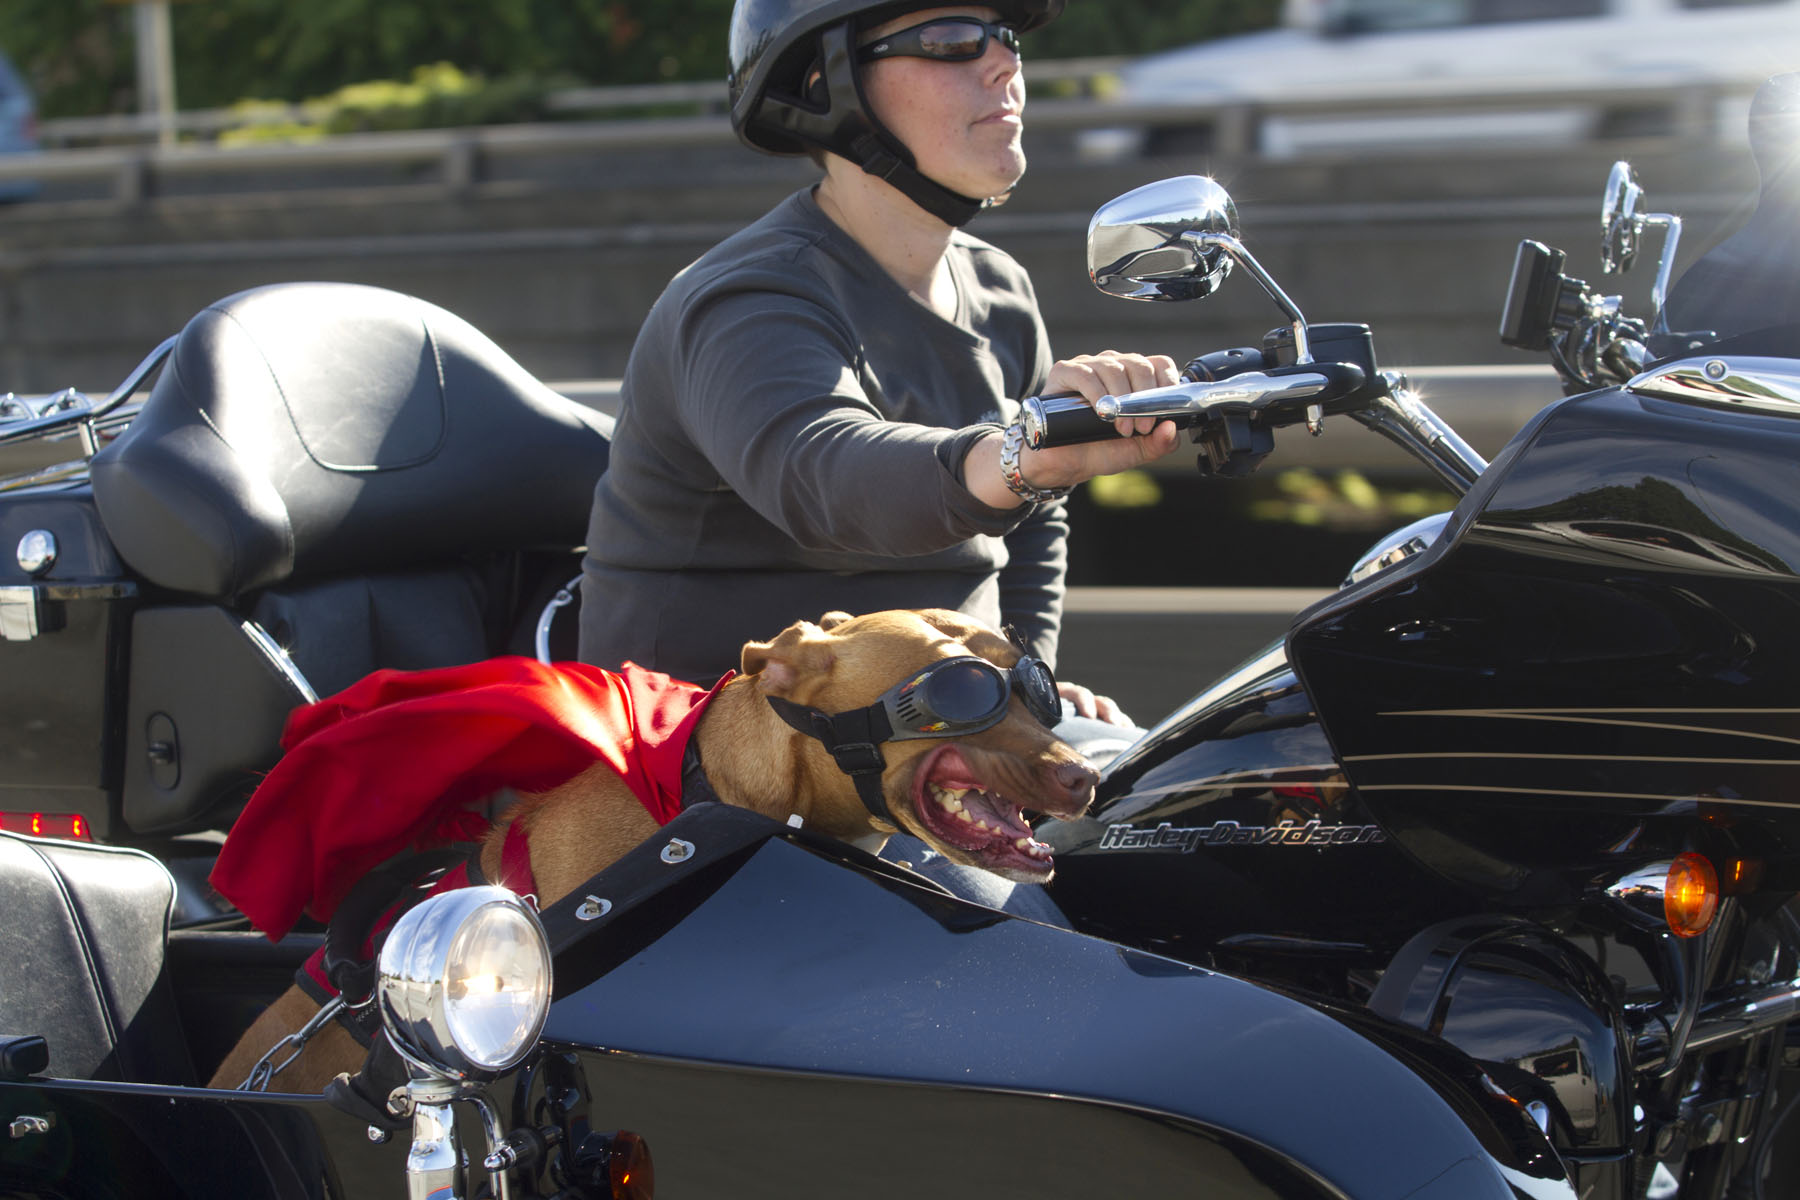 Brande and Luce ride the motorcycle in Seattle, WA on July 27, 2014